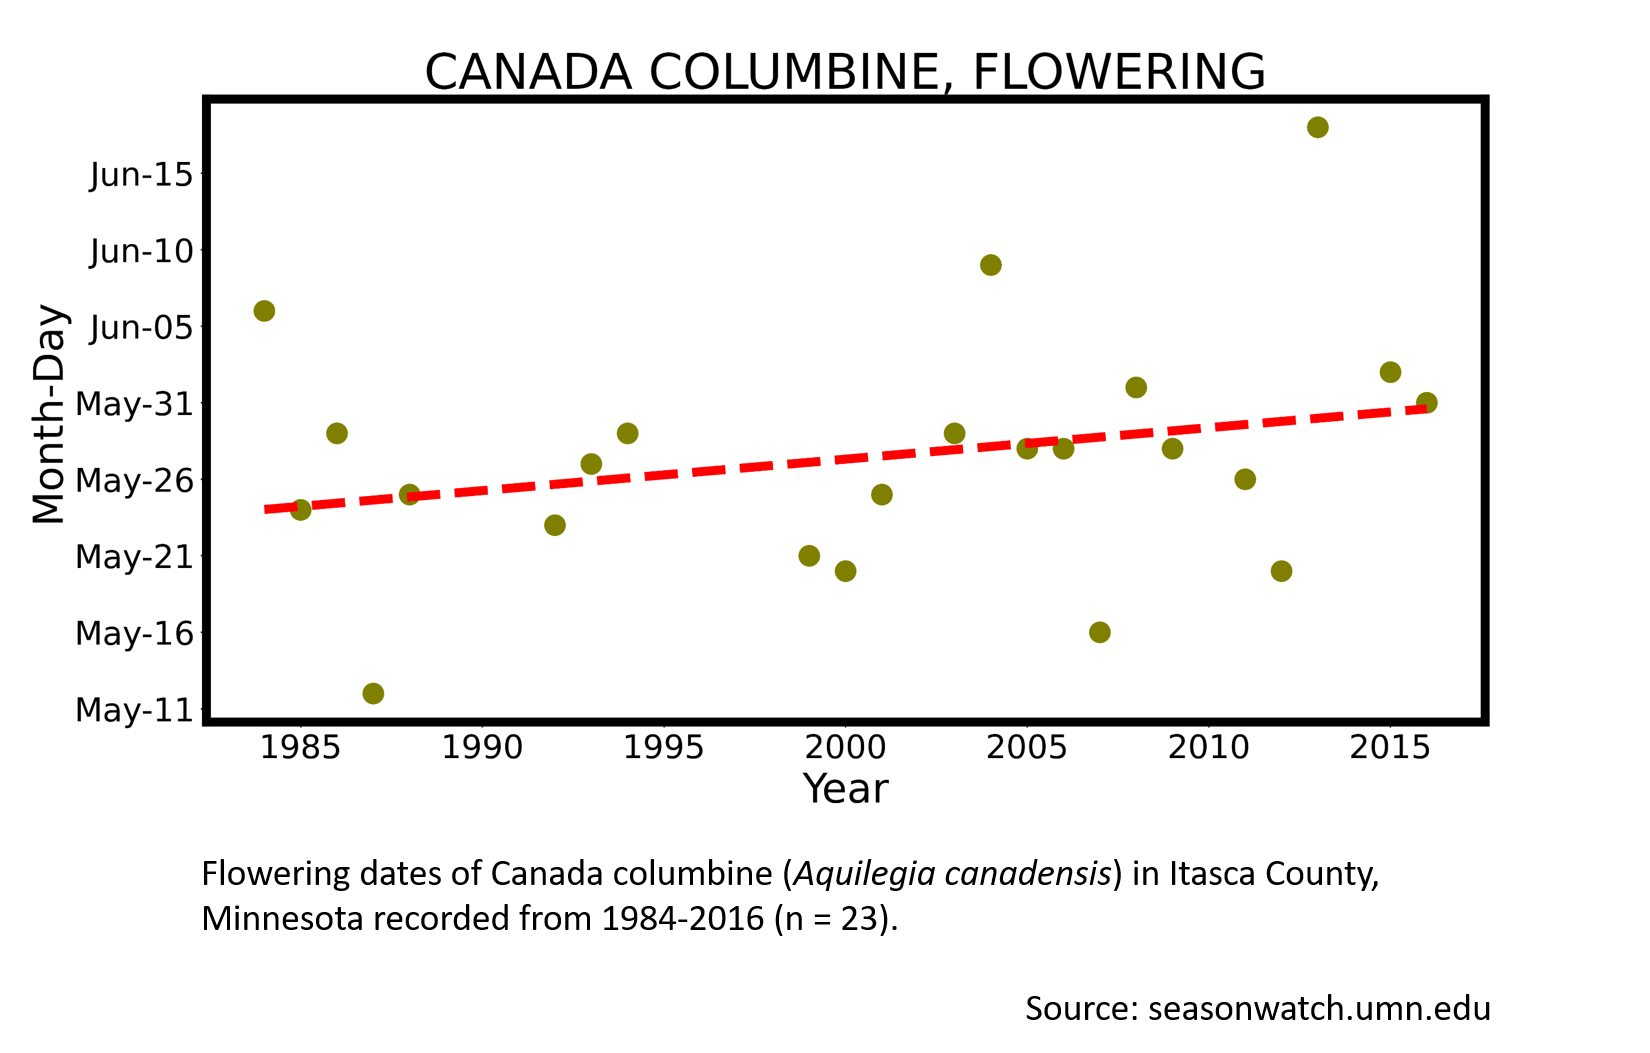 Scatterplot showing red columbine phenology in Itasca County, Minnesota